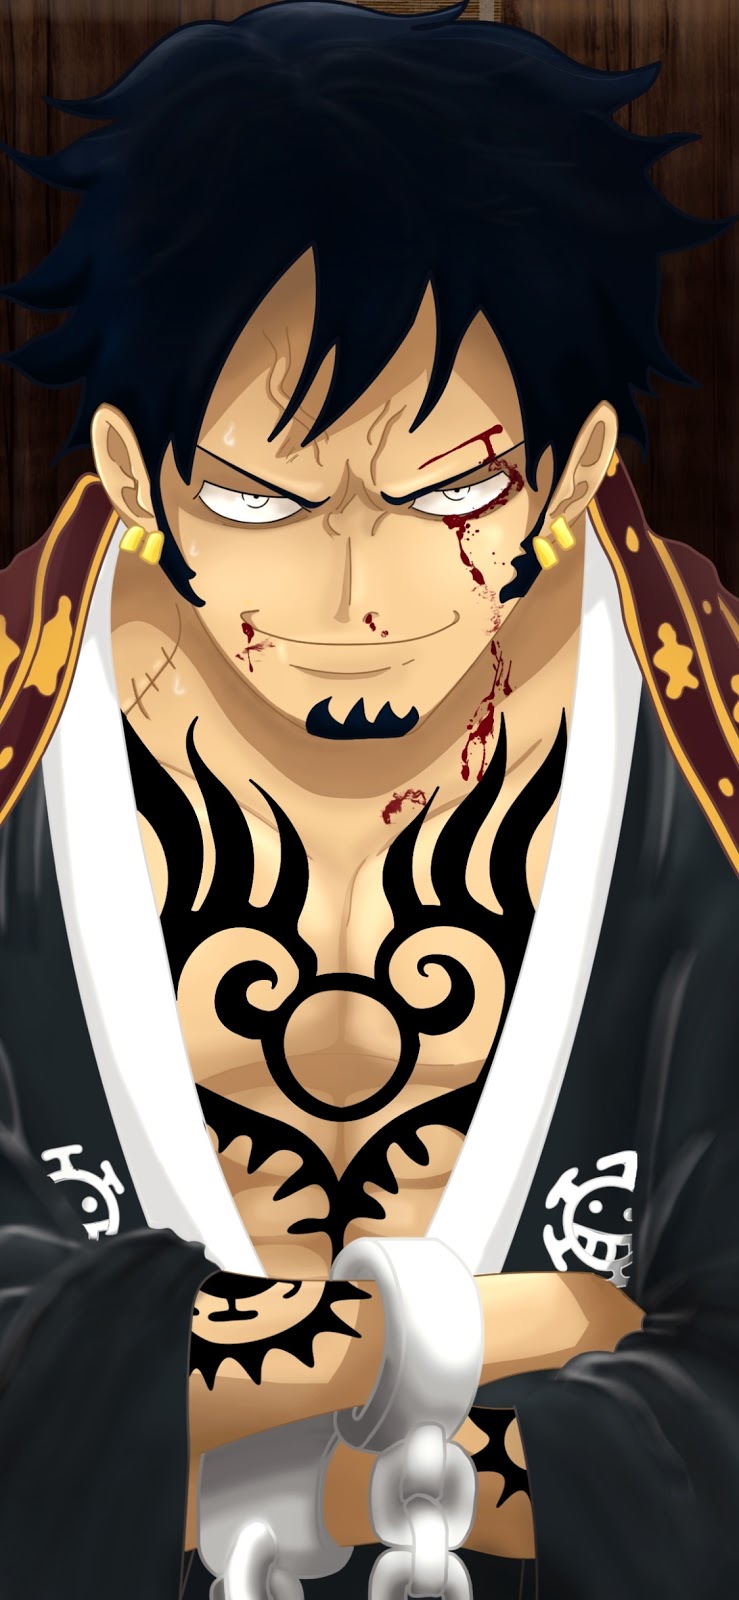 Law One Piece Wallpapers